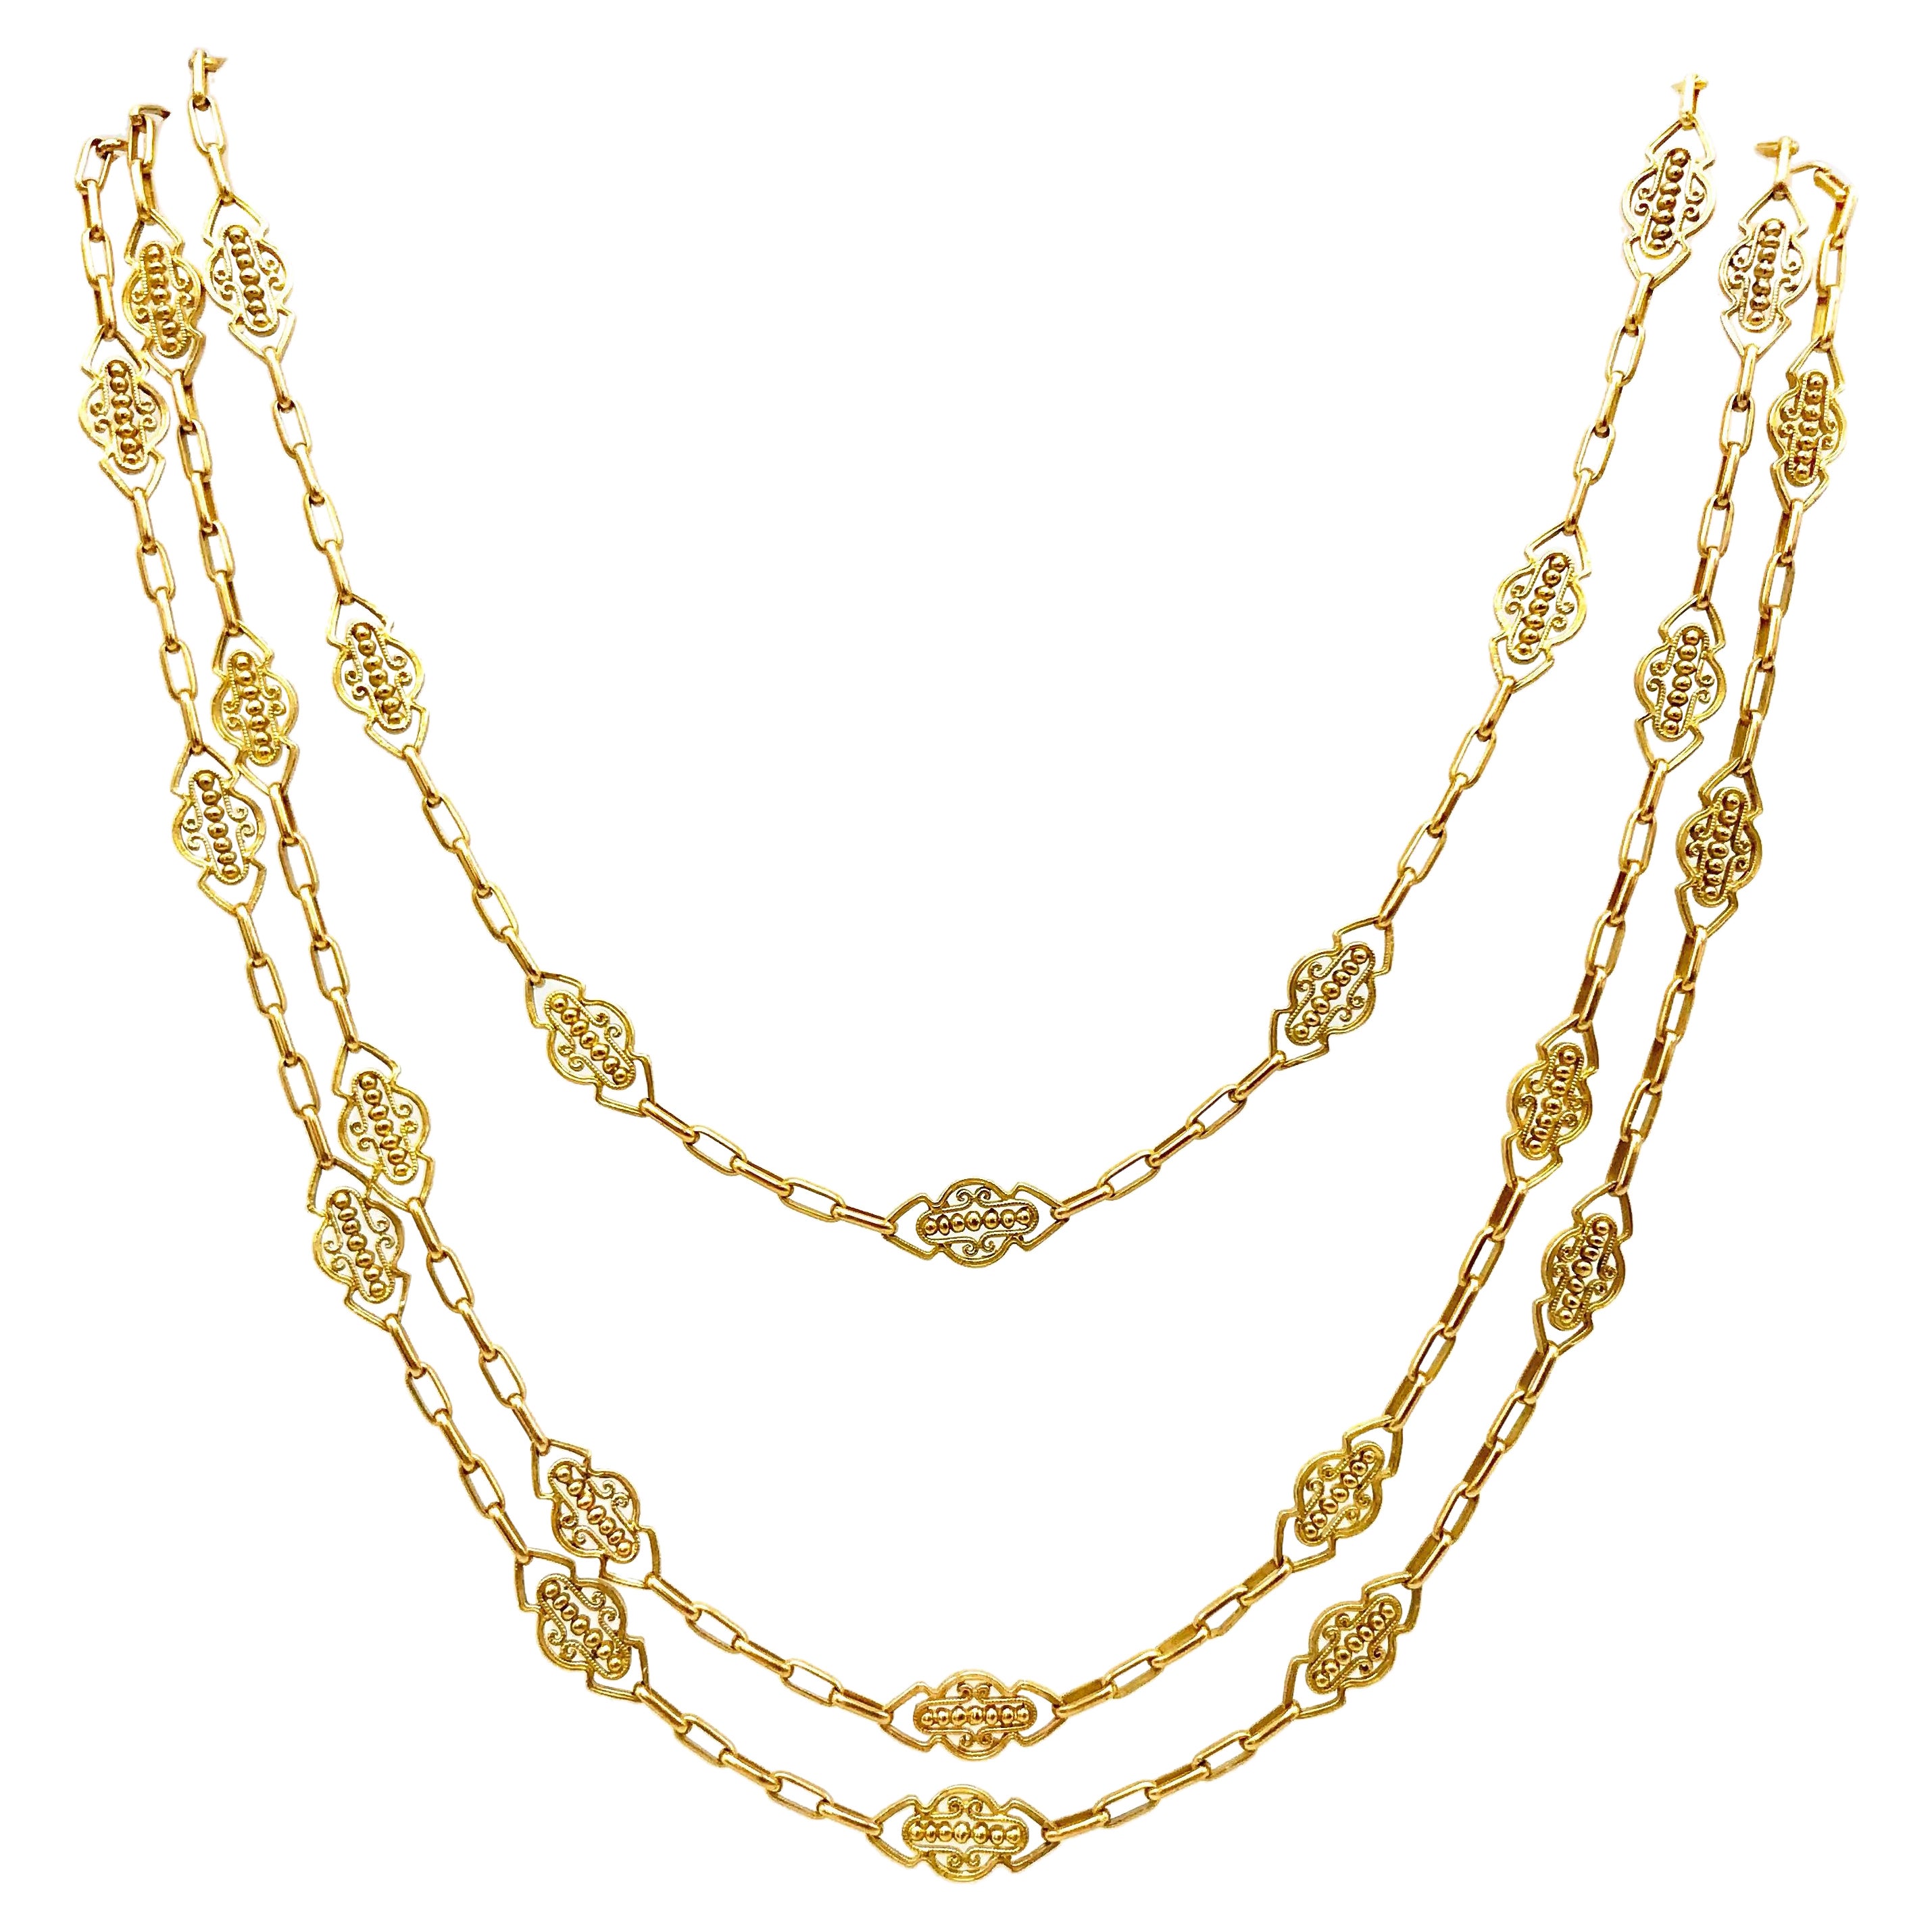 French Antique Yellow Gold Filigree Watch Chain Necklace